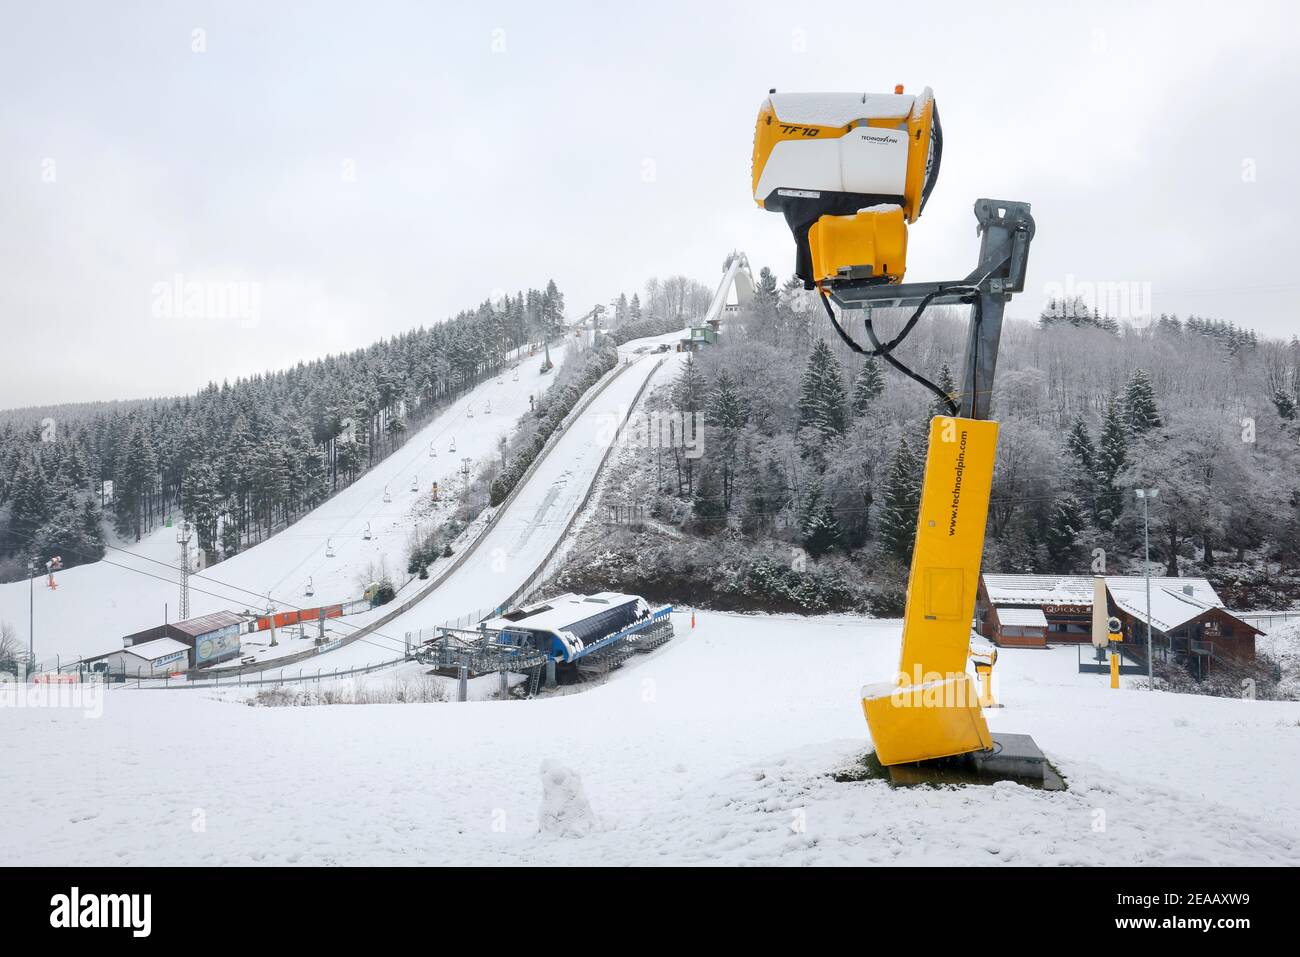 December 07, 2020, Winterberg, Sauerland, North Rhine-Westphalia, Germany, Ski carousel, no winter sports in Winterberg in times of the corona crisis during the second part of the lockdown, ski lifts remain closed in accordance with the new Corona Protection Ordinance in NRW. 00X201207D030CARO Stock Photo